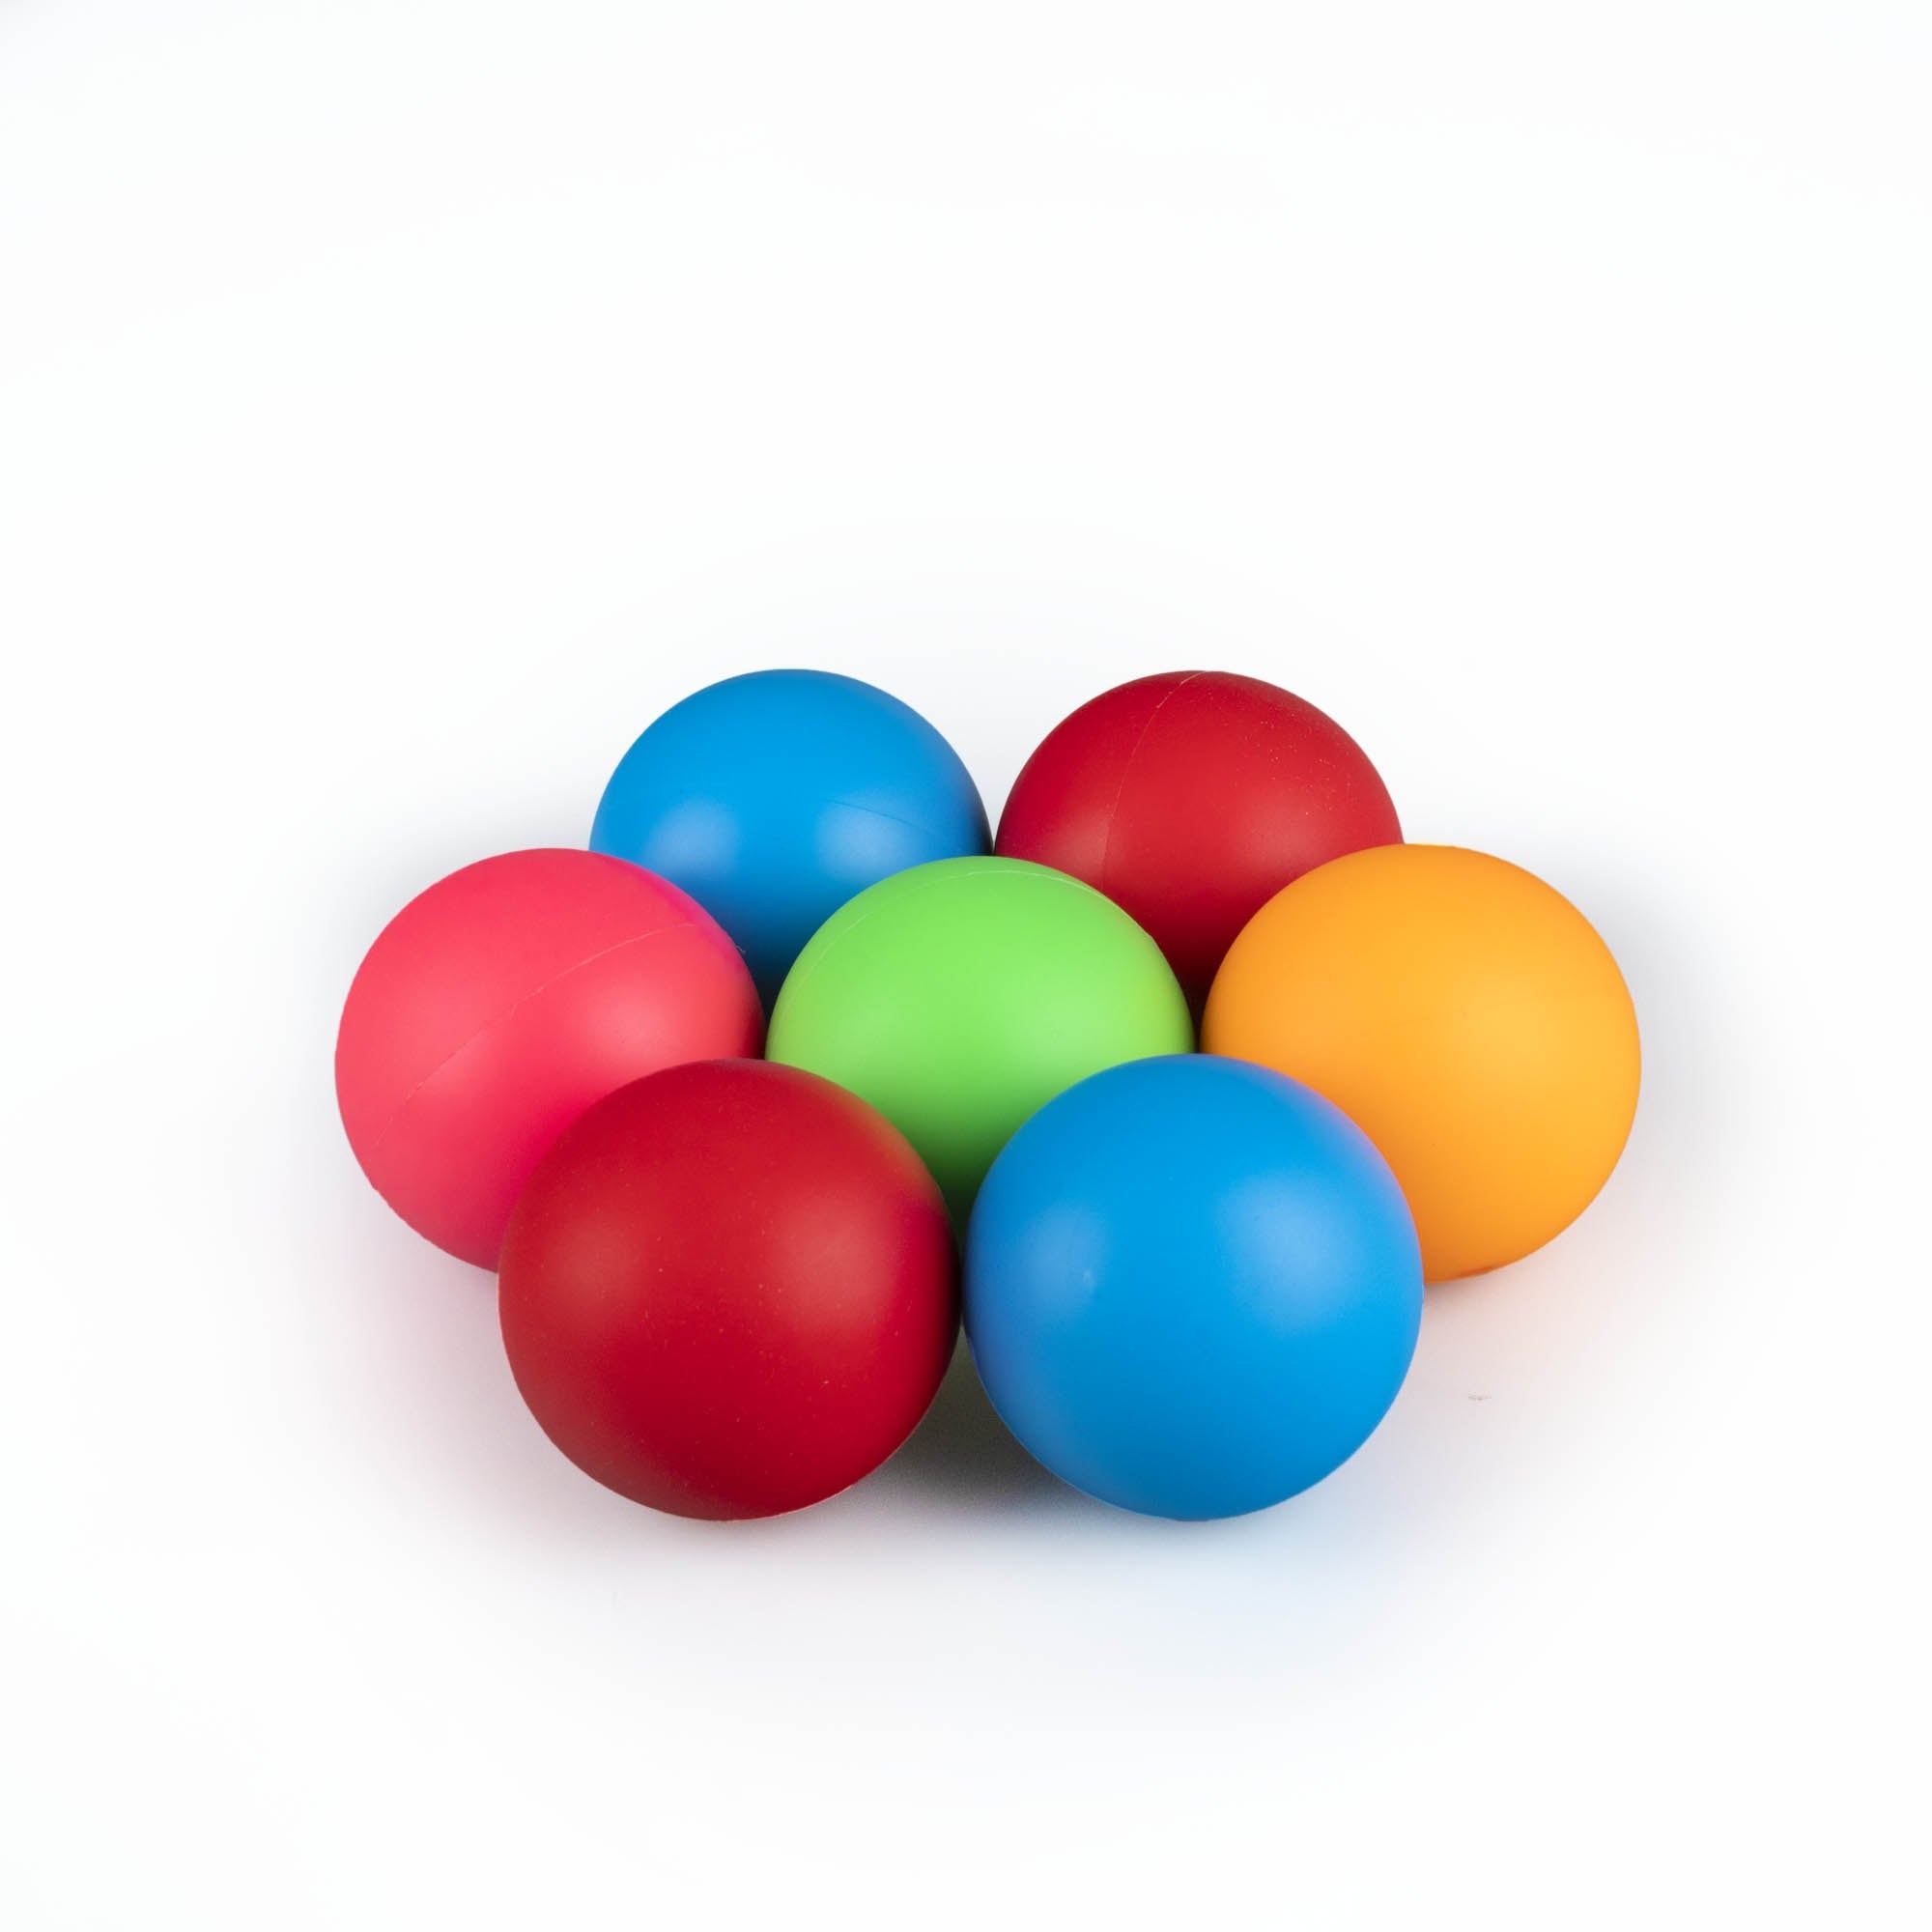 MMX 62mm Juggling balls, all colours in group shot